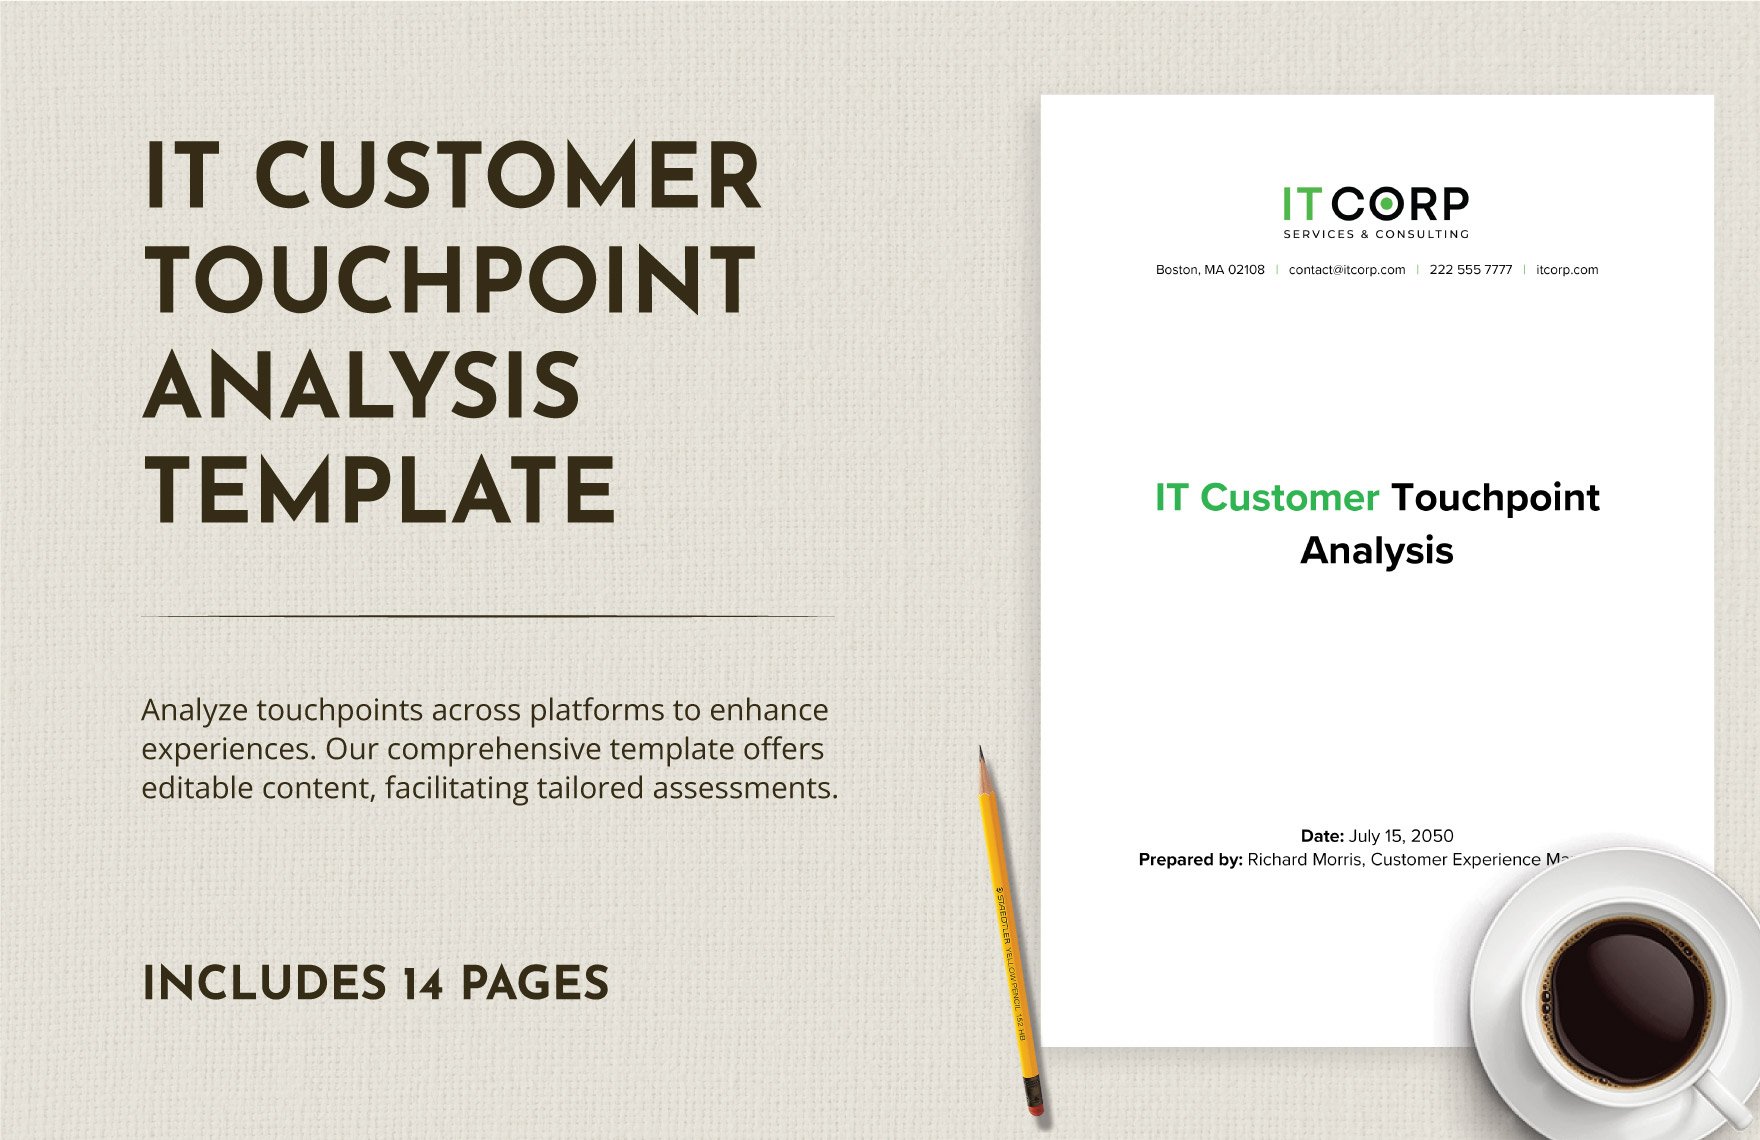 IT Customer Touchpoint Analysis Template